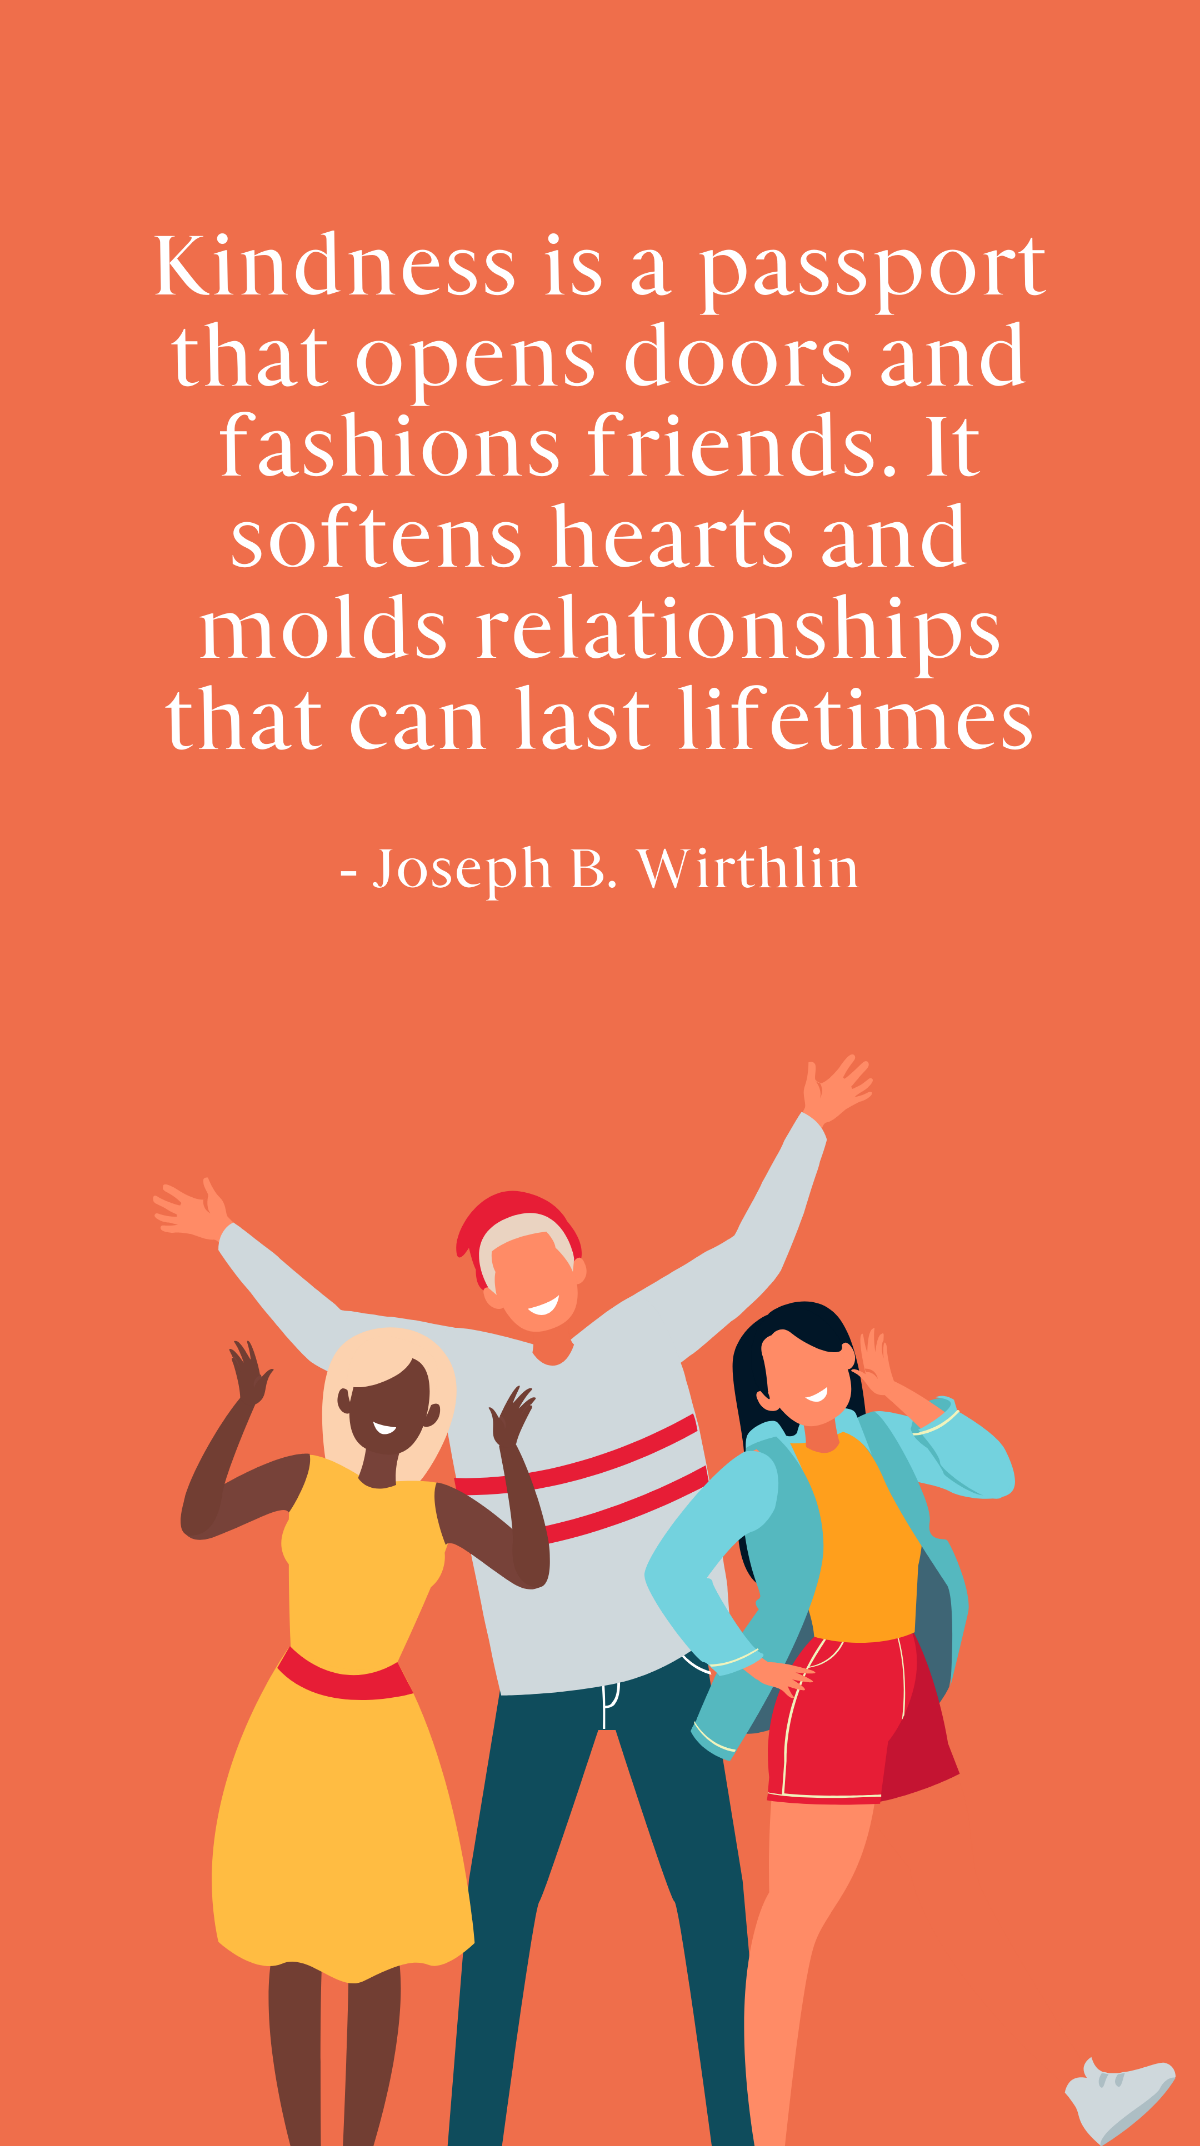 Joseph B. Wirthlin - Kindness is a passport that opens doors and fashions friends. It softens hearts and molds relationships that can last lifetimes